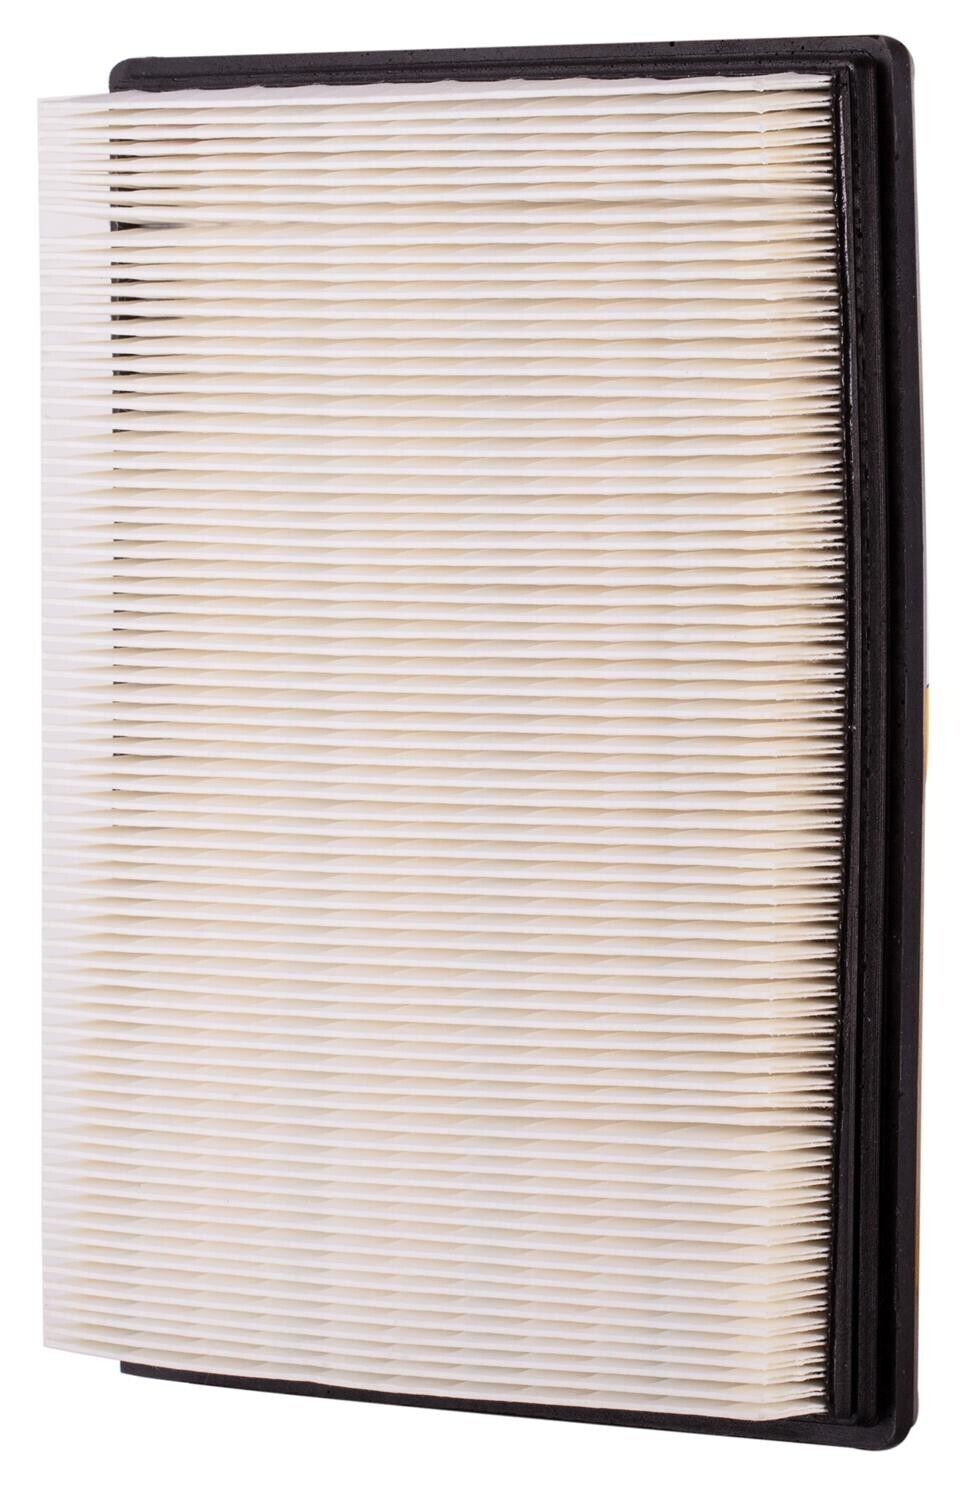 Pronto Air Filter for Elantra GT, 300M, Concorde, Intrepid, LHS PA5265